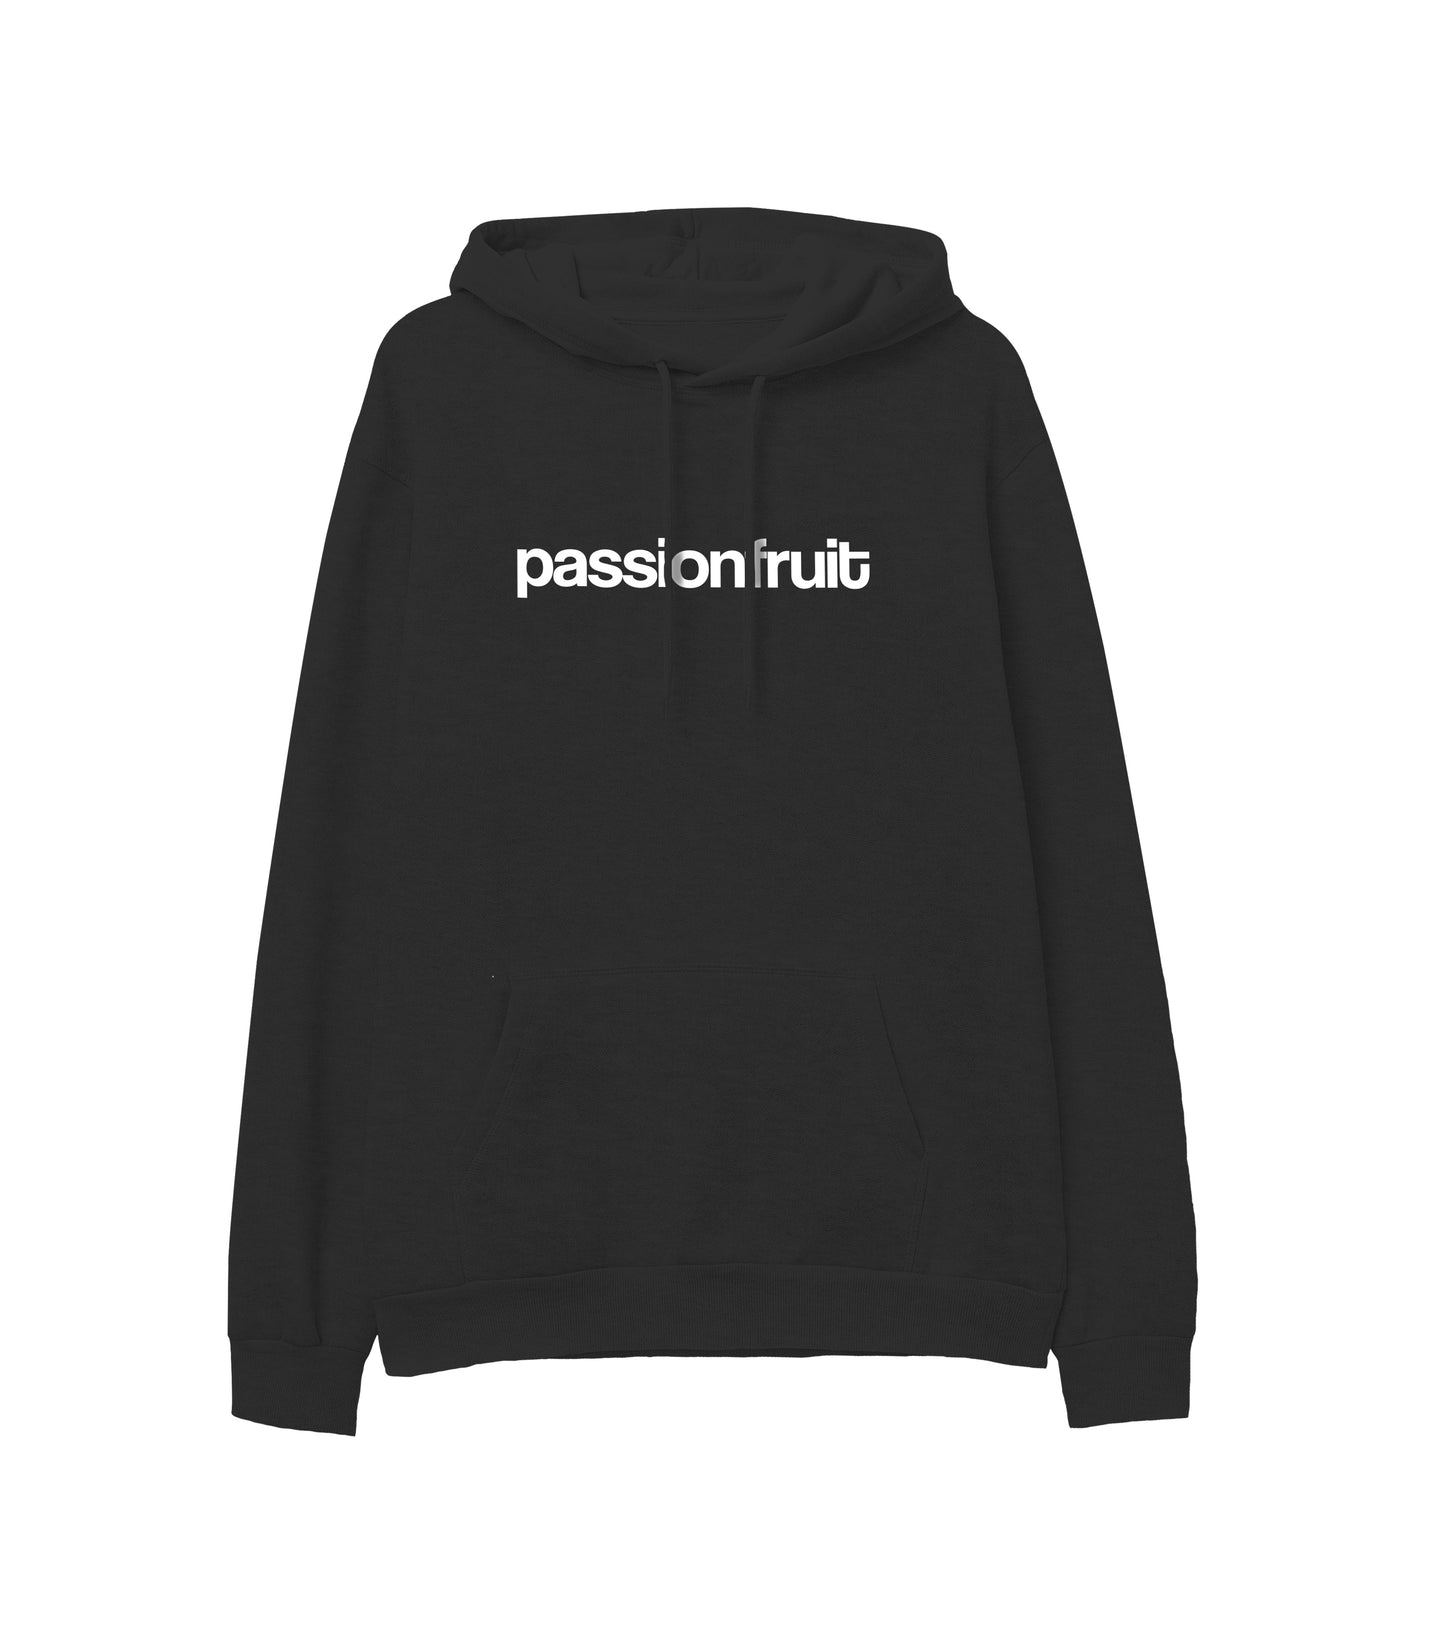 "Passionfruit From Miles Away" Hoodie - Buy One Get One 50% OFF